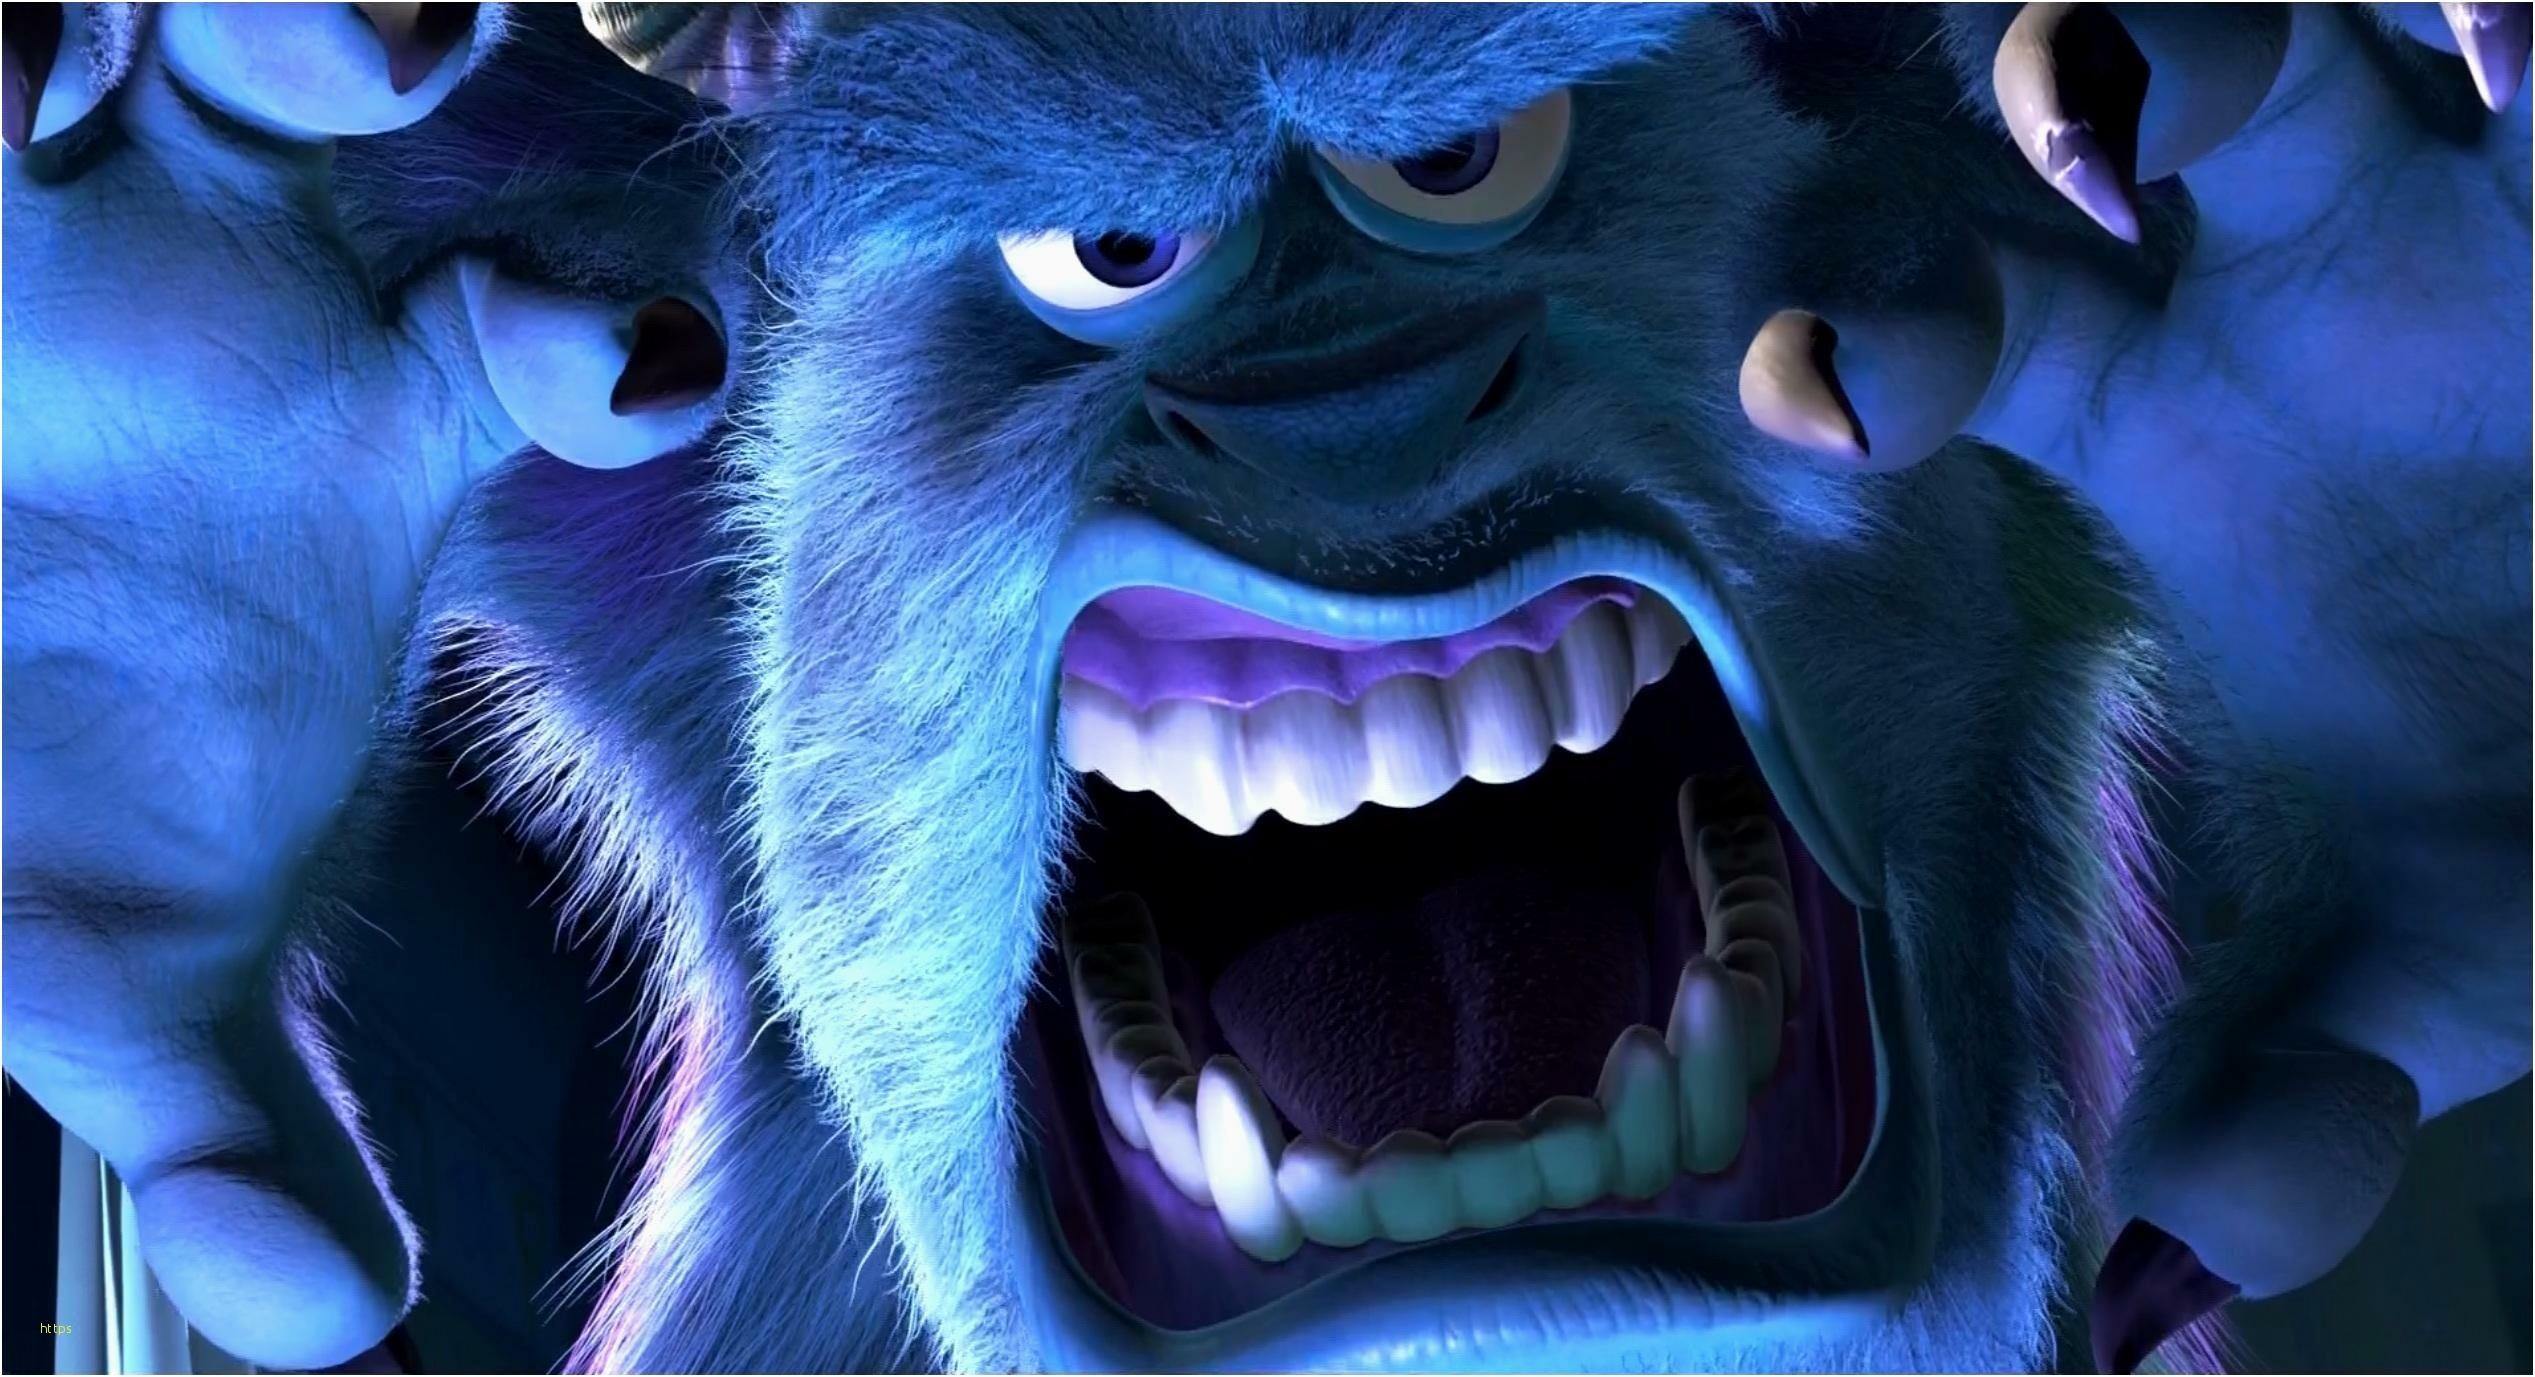 Monsters, Inc.: James P. "Sulley" Sullivan, The protagonist of the 2001 Disney•Pixar animated film Monsters. 2540x1380 HD Wallpaper.